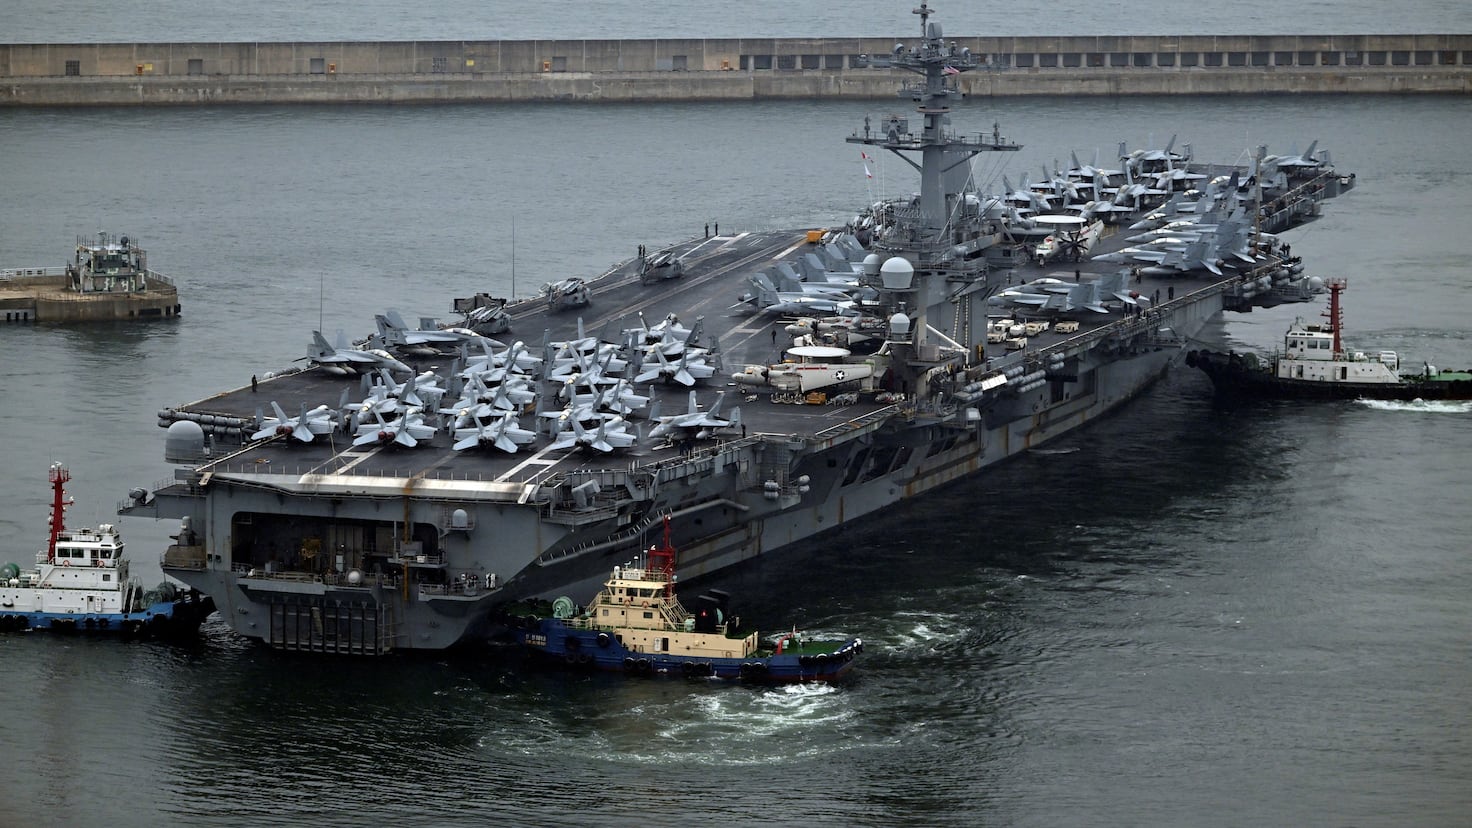 The US sends one of its largest combat ships to South Korea
